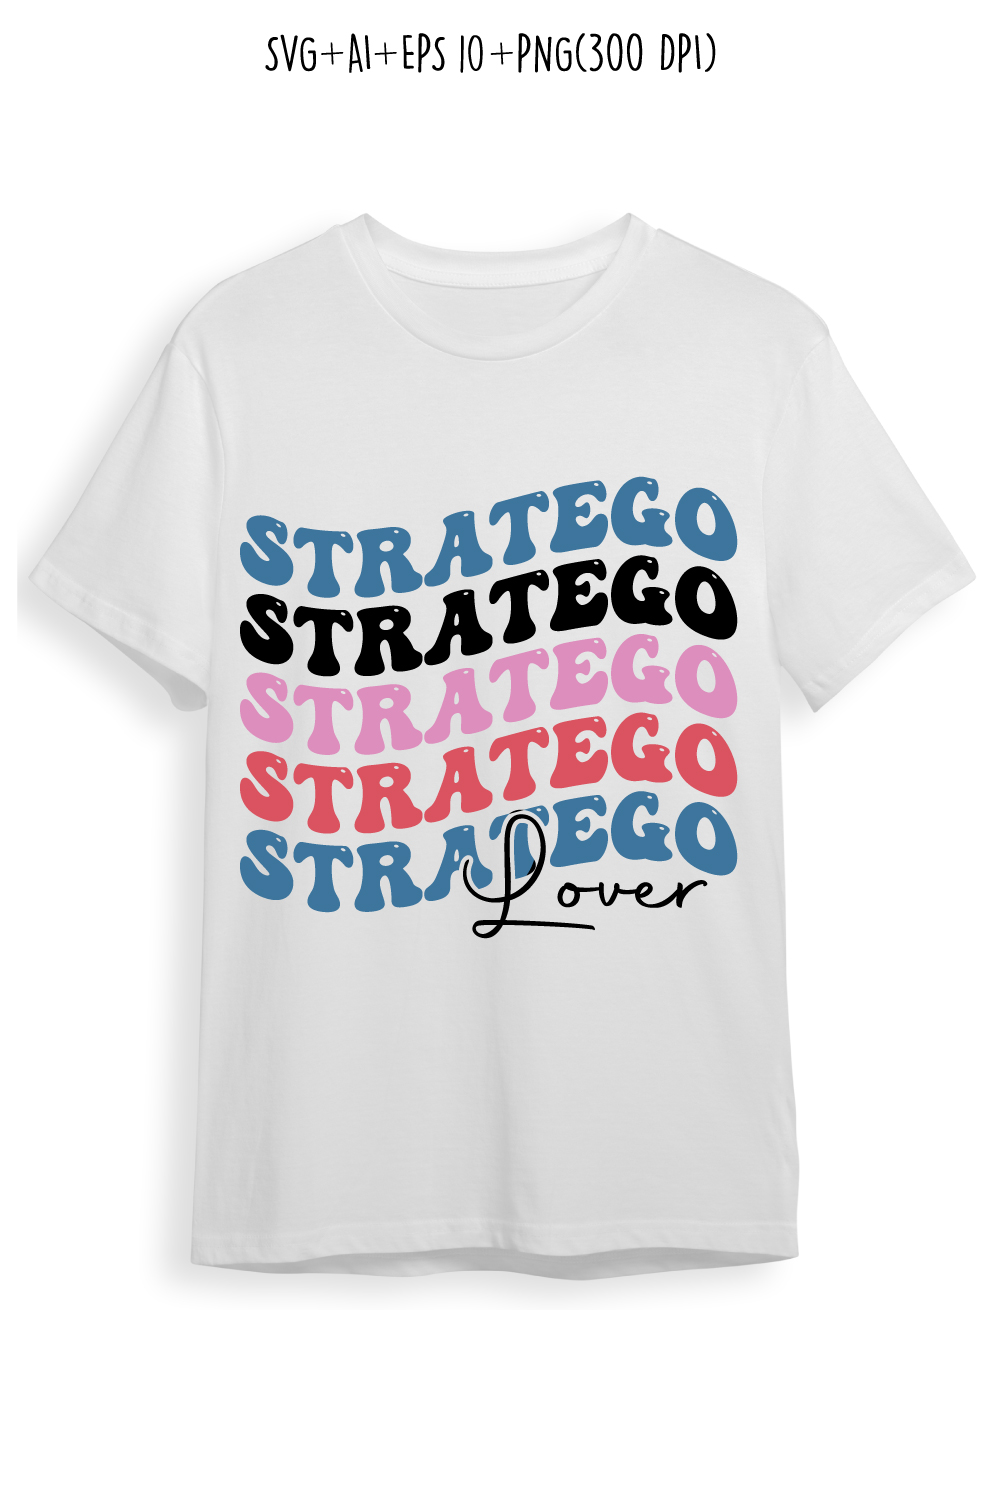 stratego lover indoor game retro typography design for t-shirts, cards, frame artwork, phone cases, bags, mugs, stickers, tumblers, print, etc pinterest preview image.